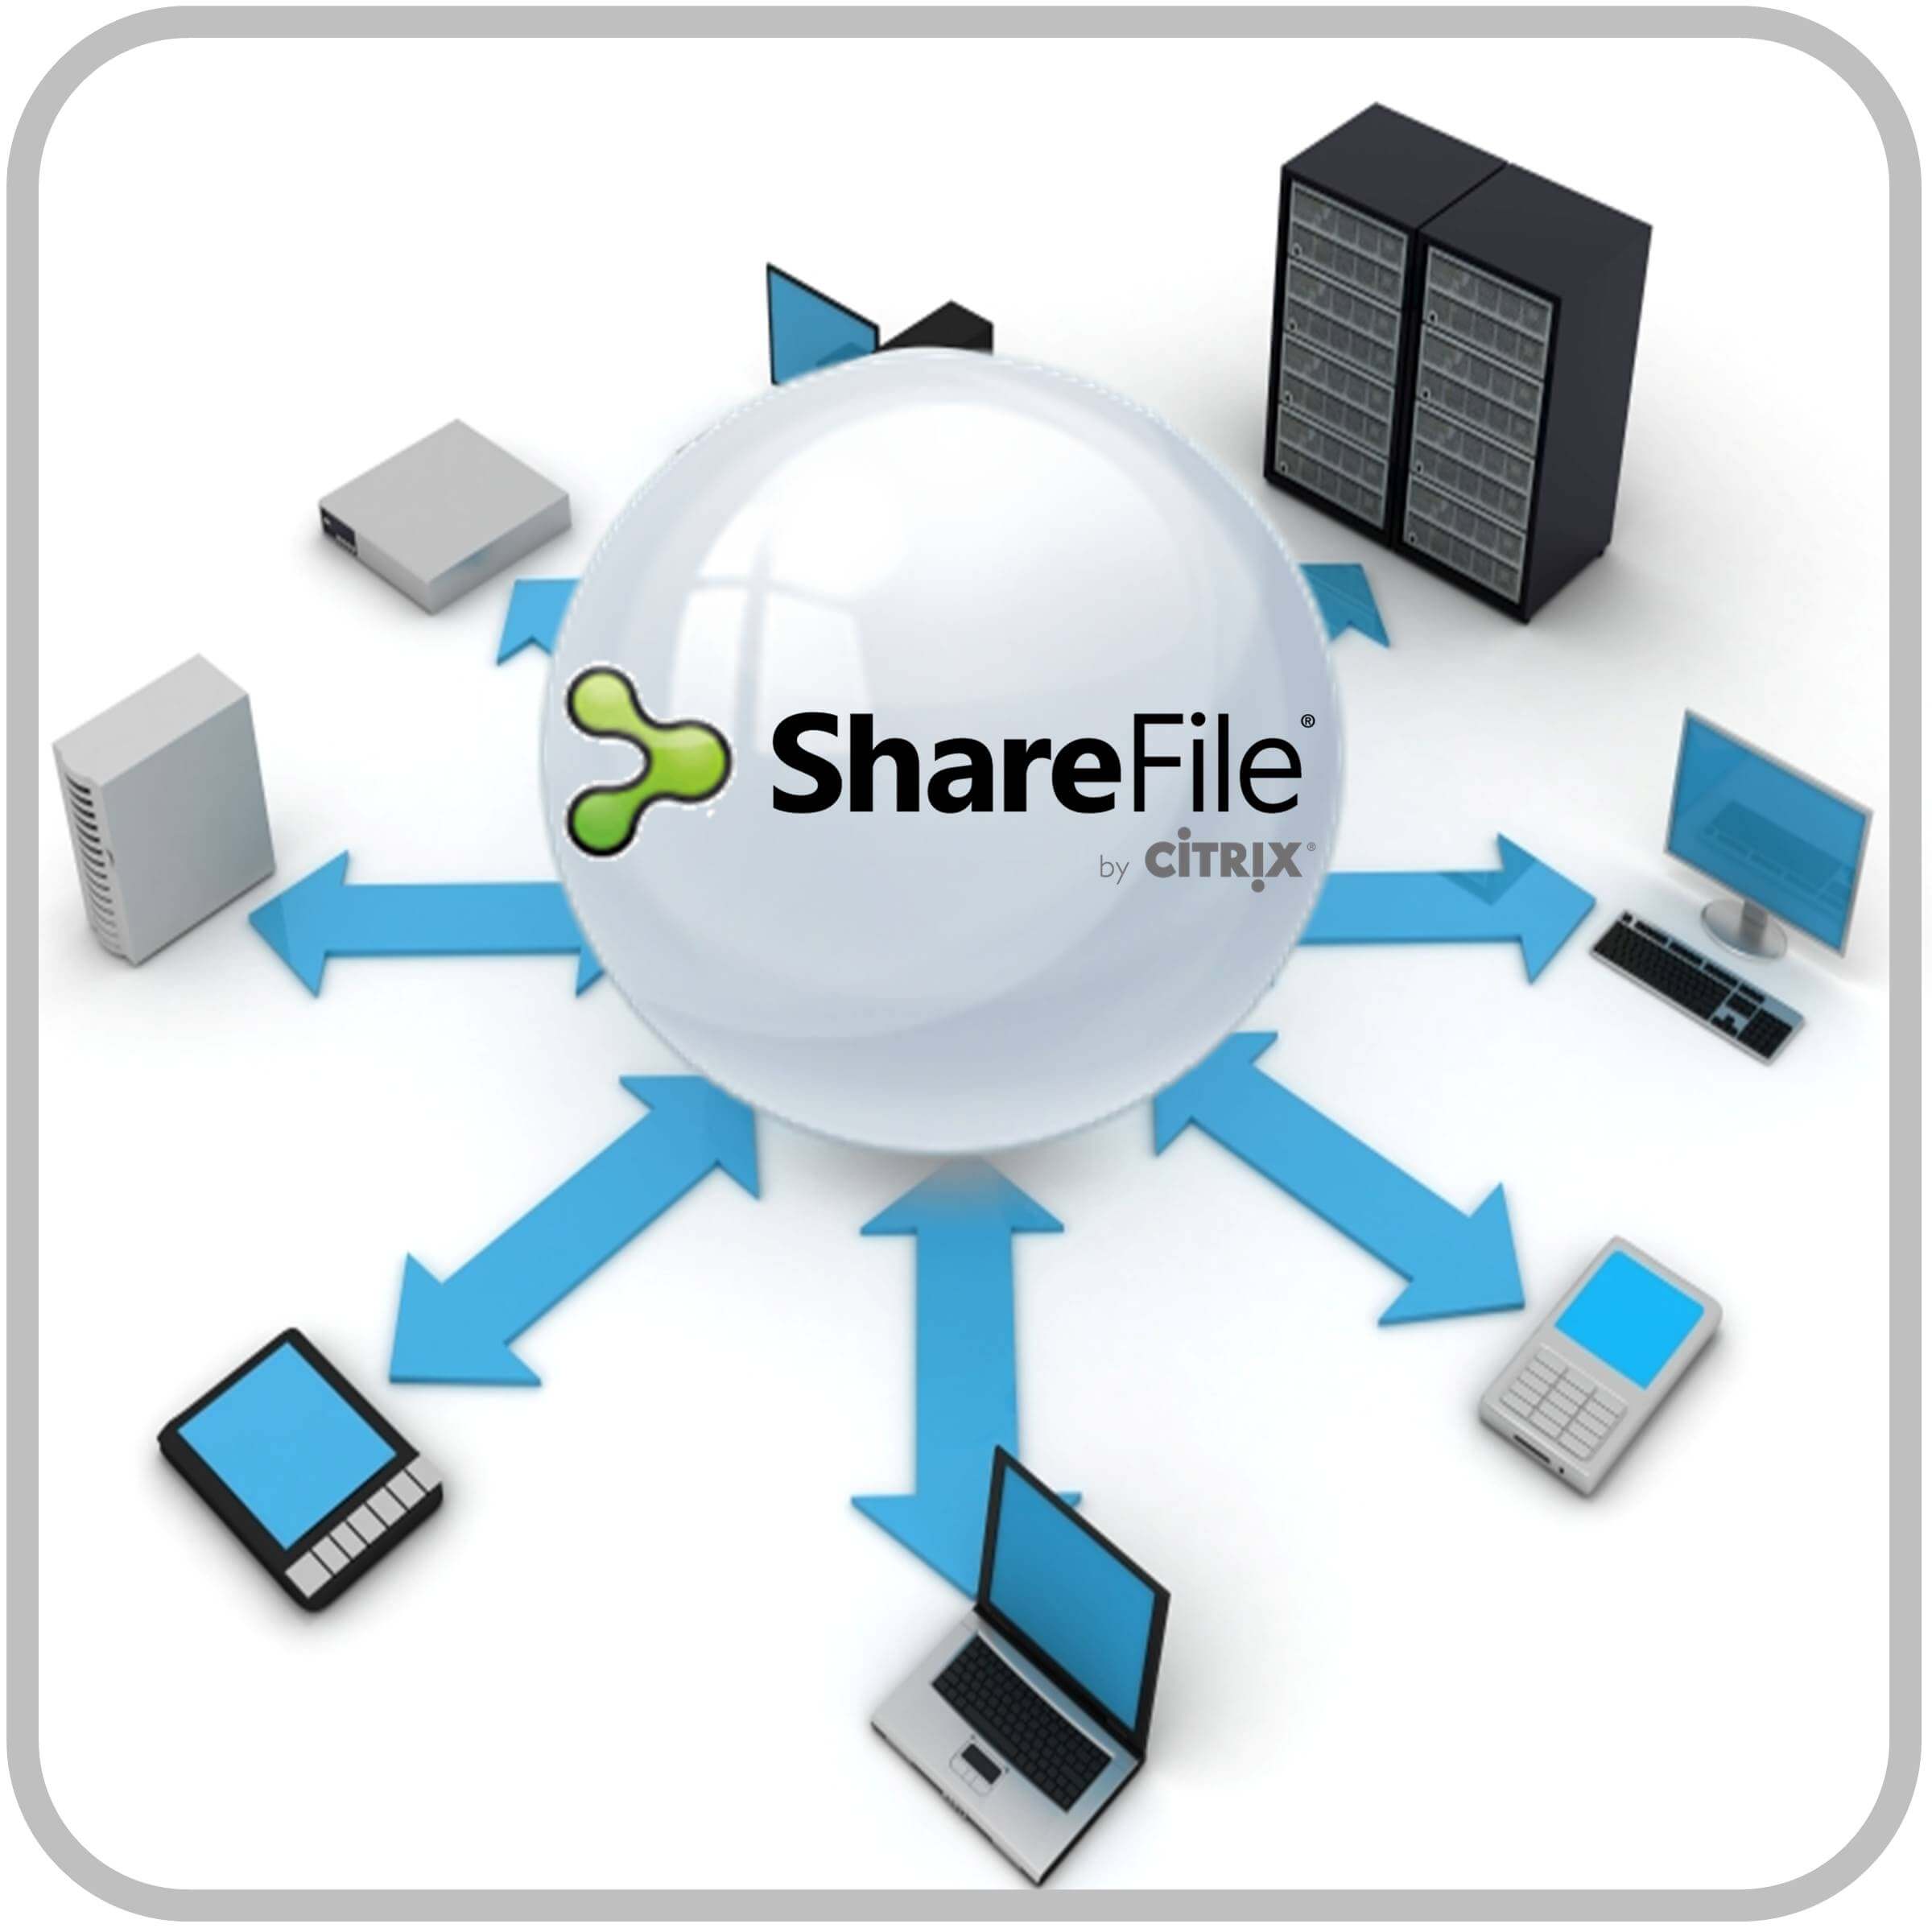 ShareFile the simple secure way to collaborate, any size on any device